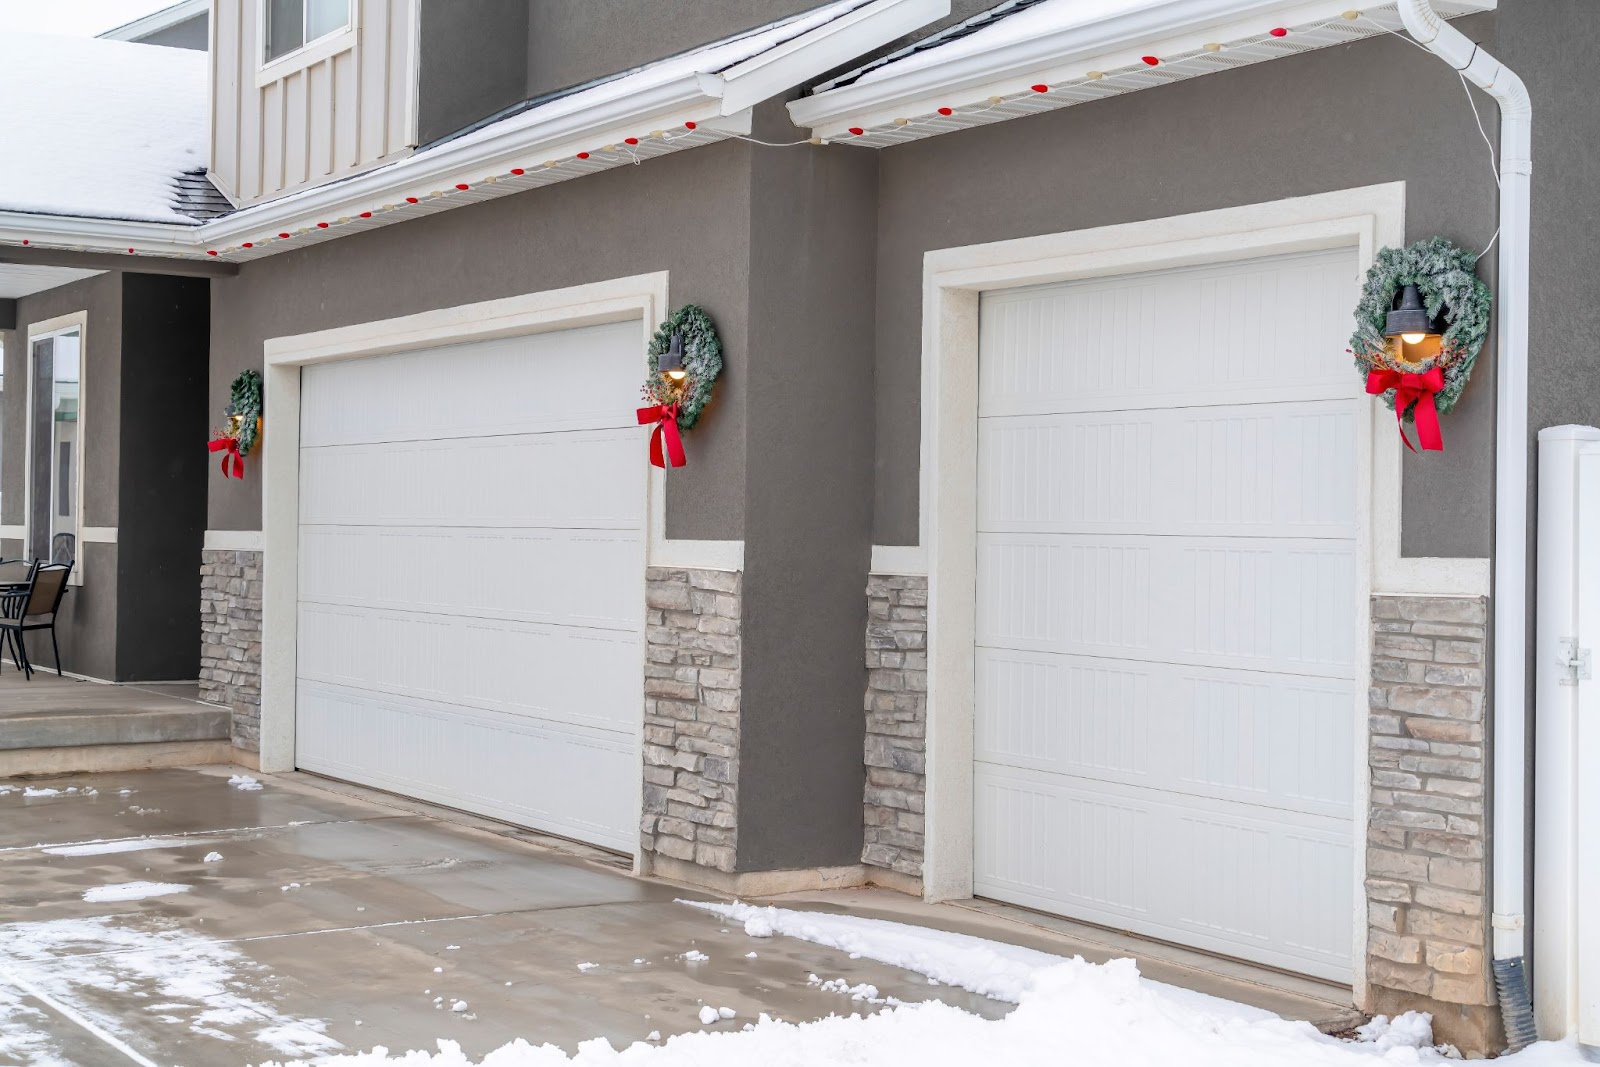 These creative garage door holiday decorations are perfect for Christmas and Halloween. Transform your garage door into something special! 